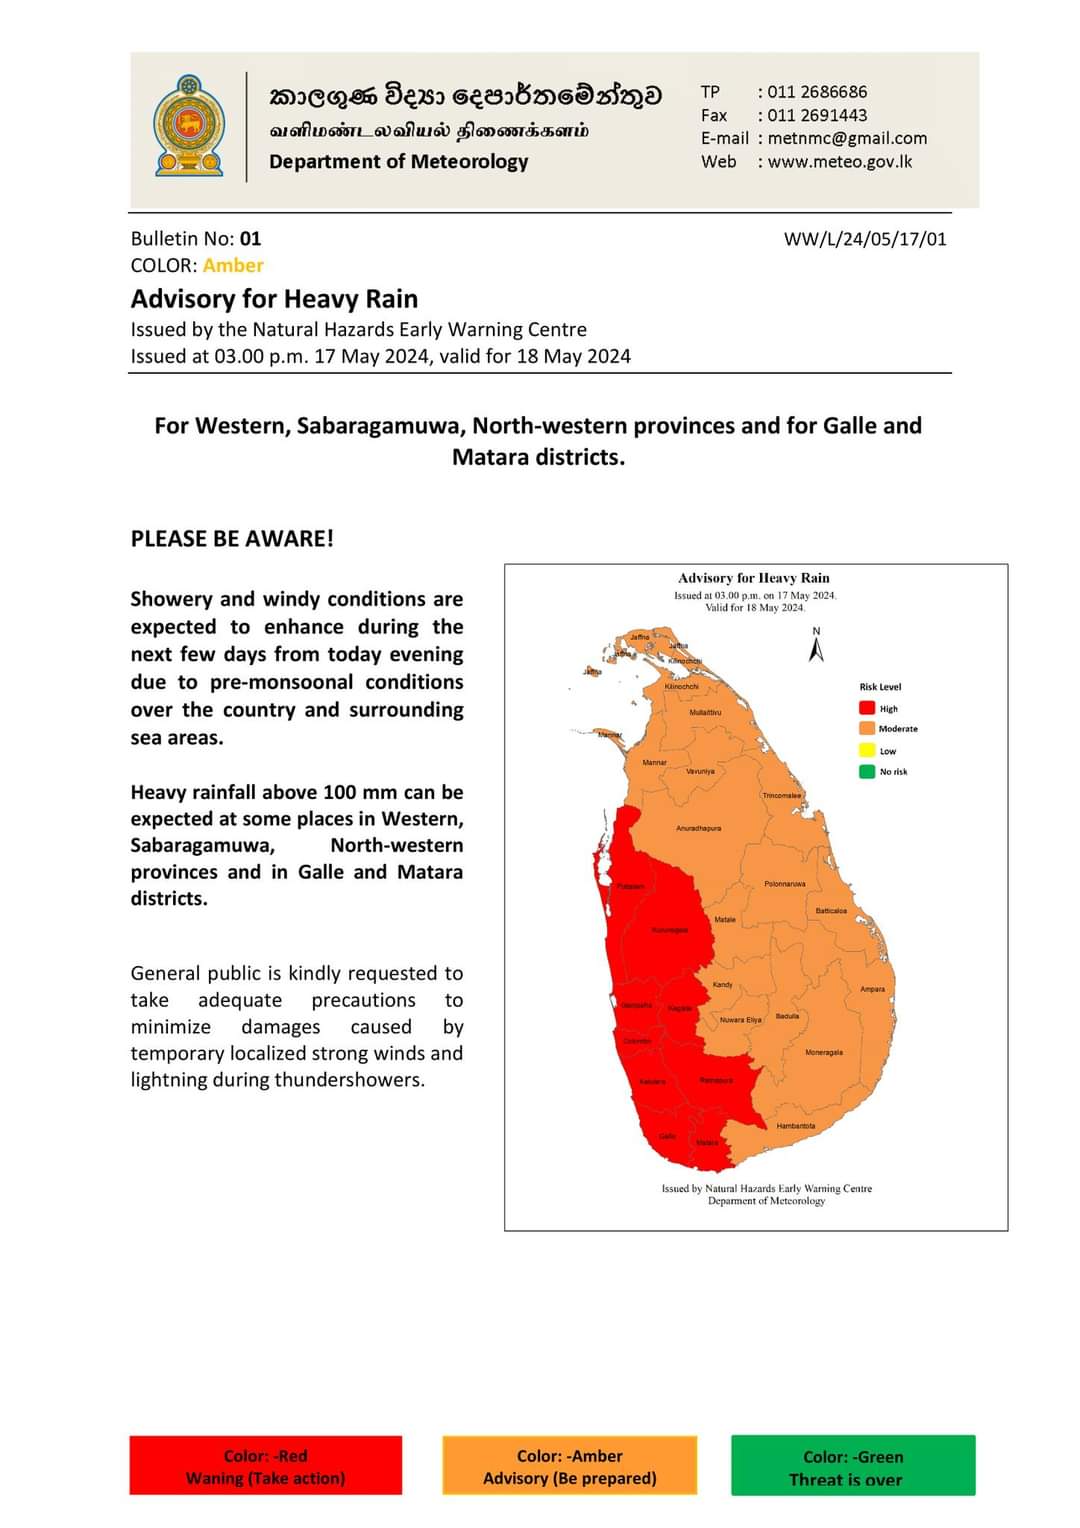 High risk advisory for heavy rain issued for 9 districts